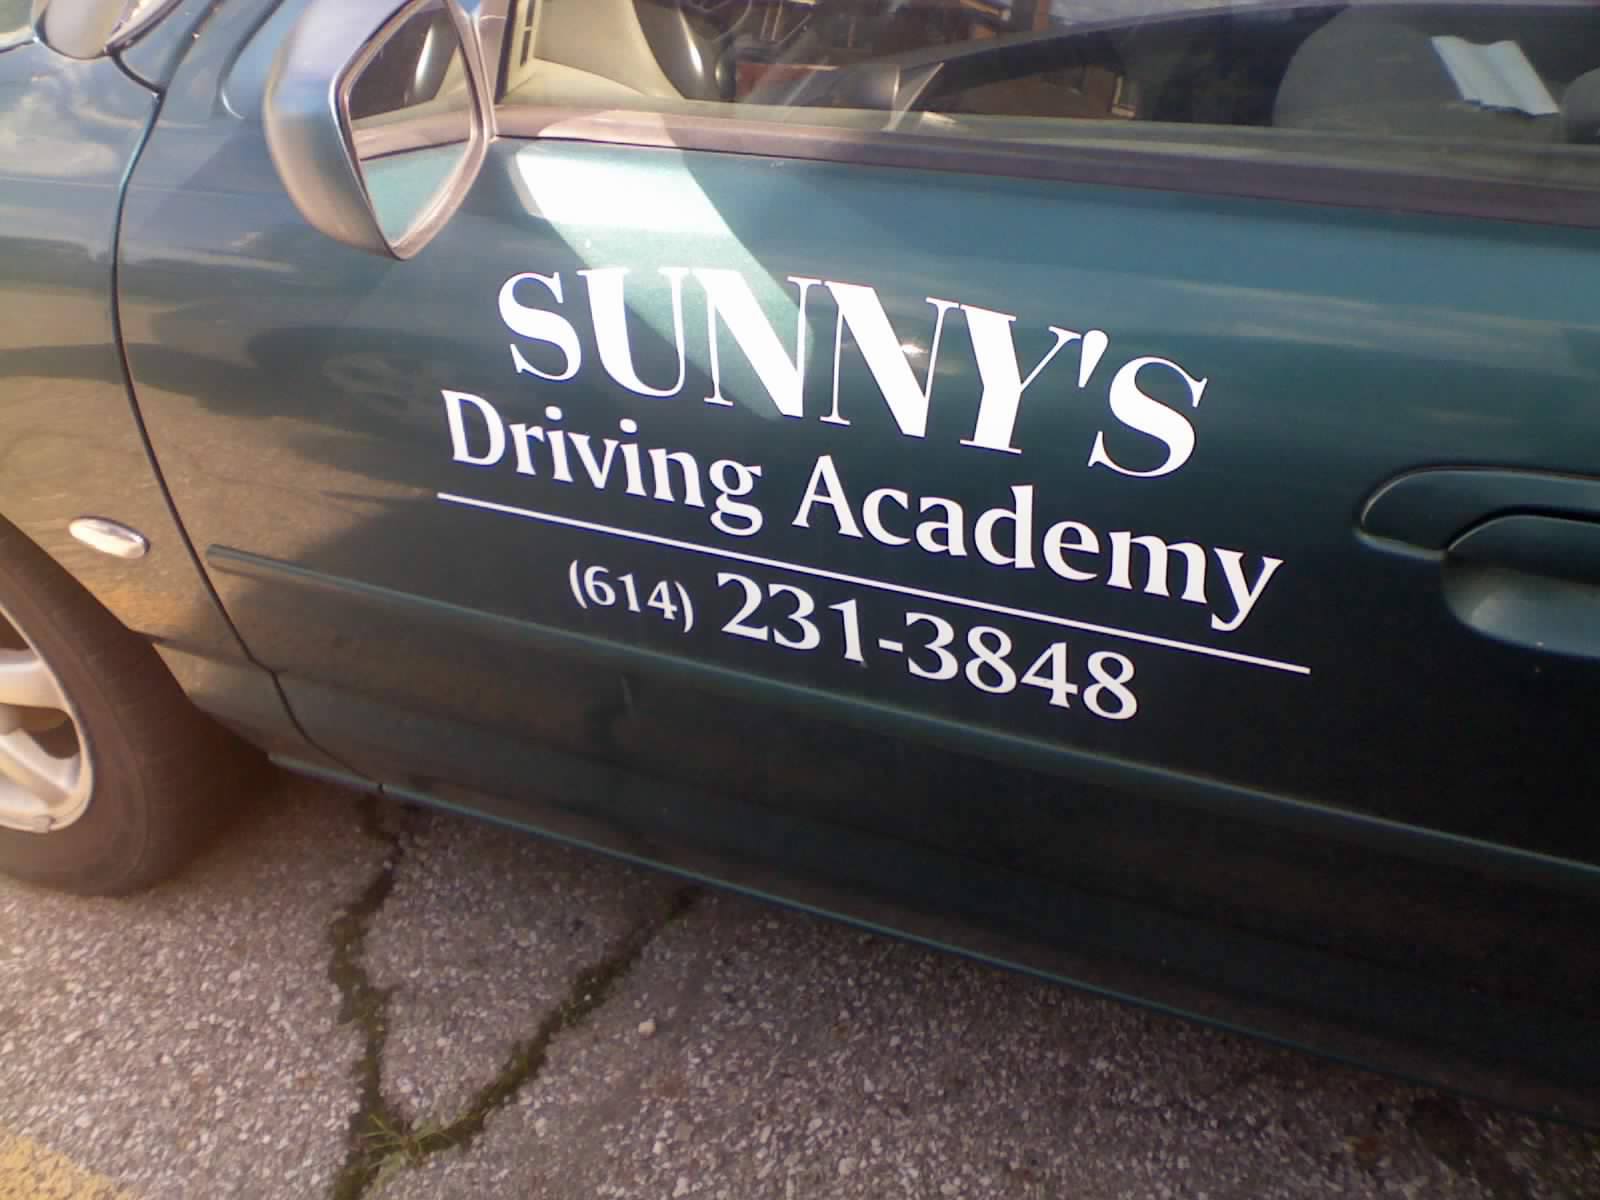 Sunny's Driving Academy